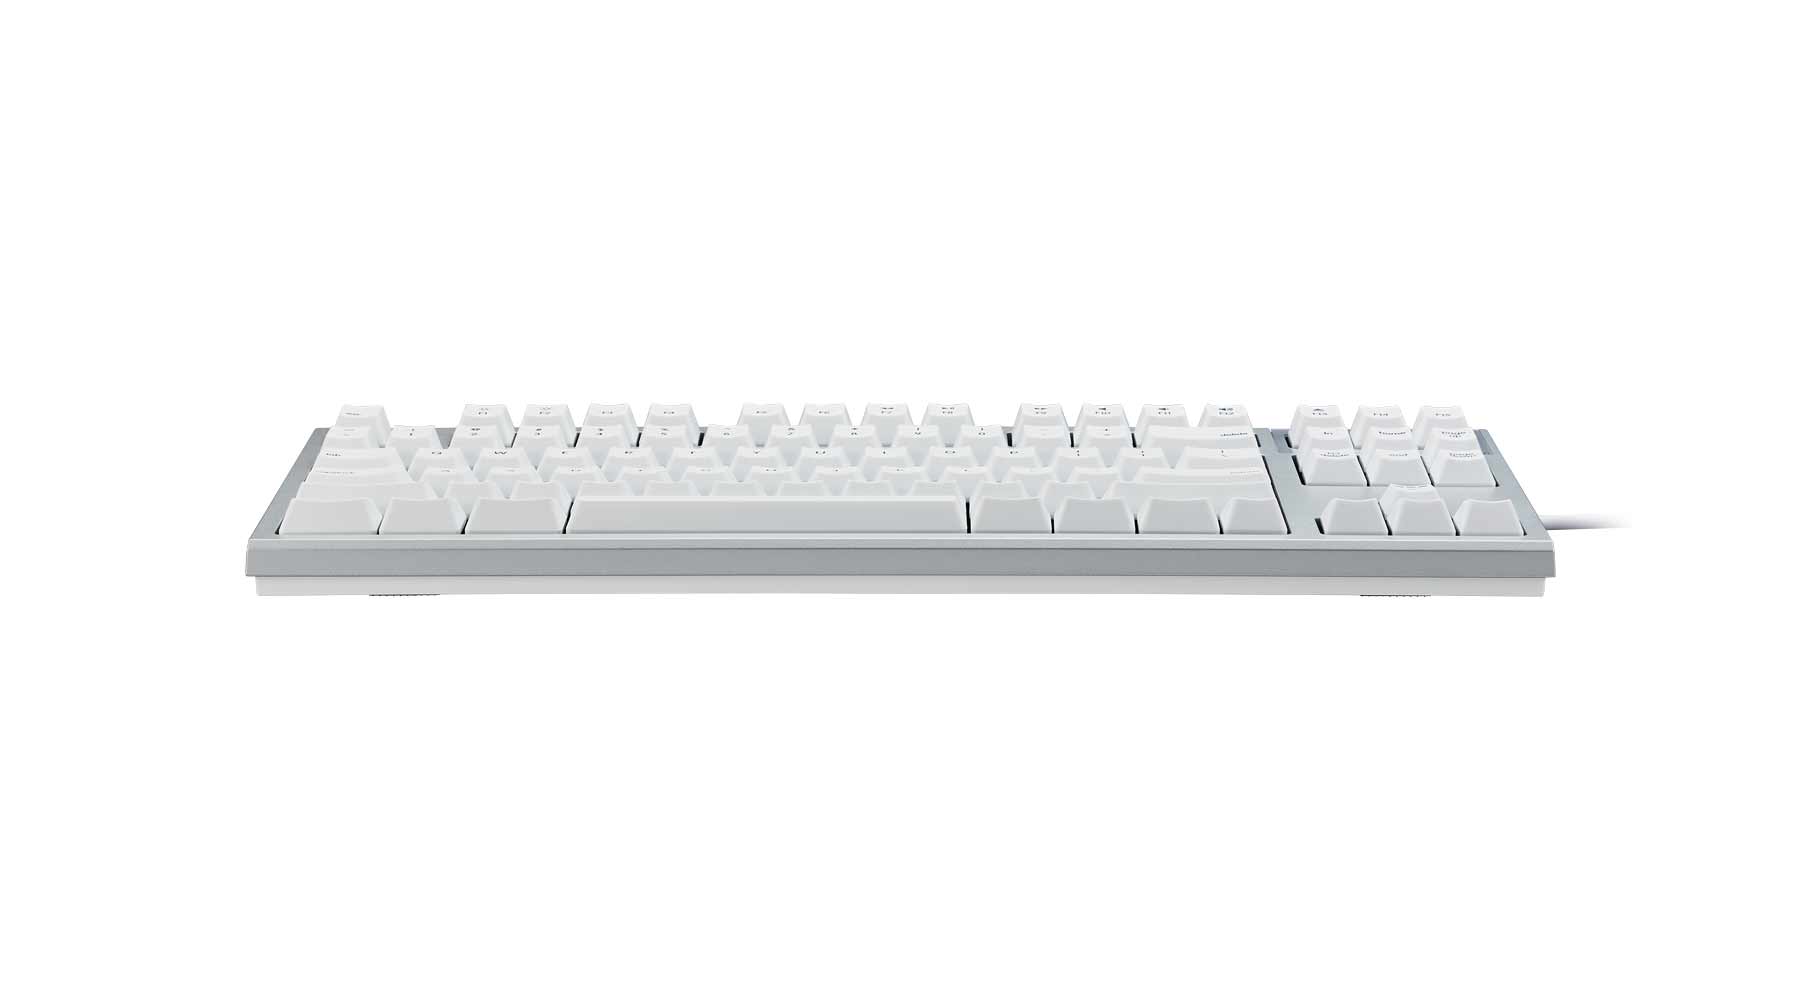 PC/タブレット PC周辺機器 Products - REALFORCE TKL SA for Mac / R2TLSA-US3M-WH | REALFORCE 